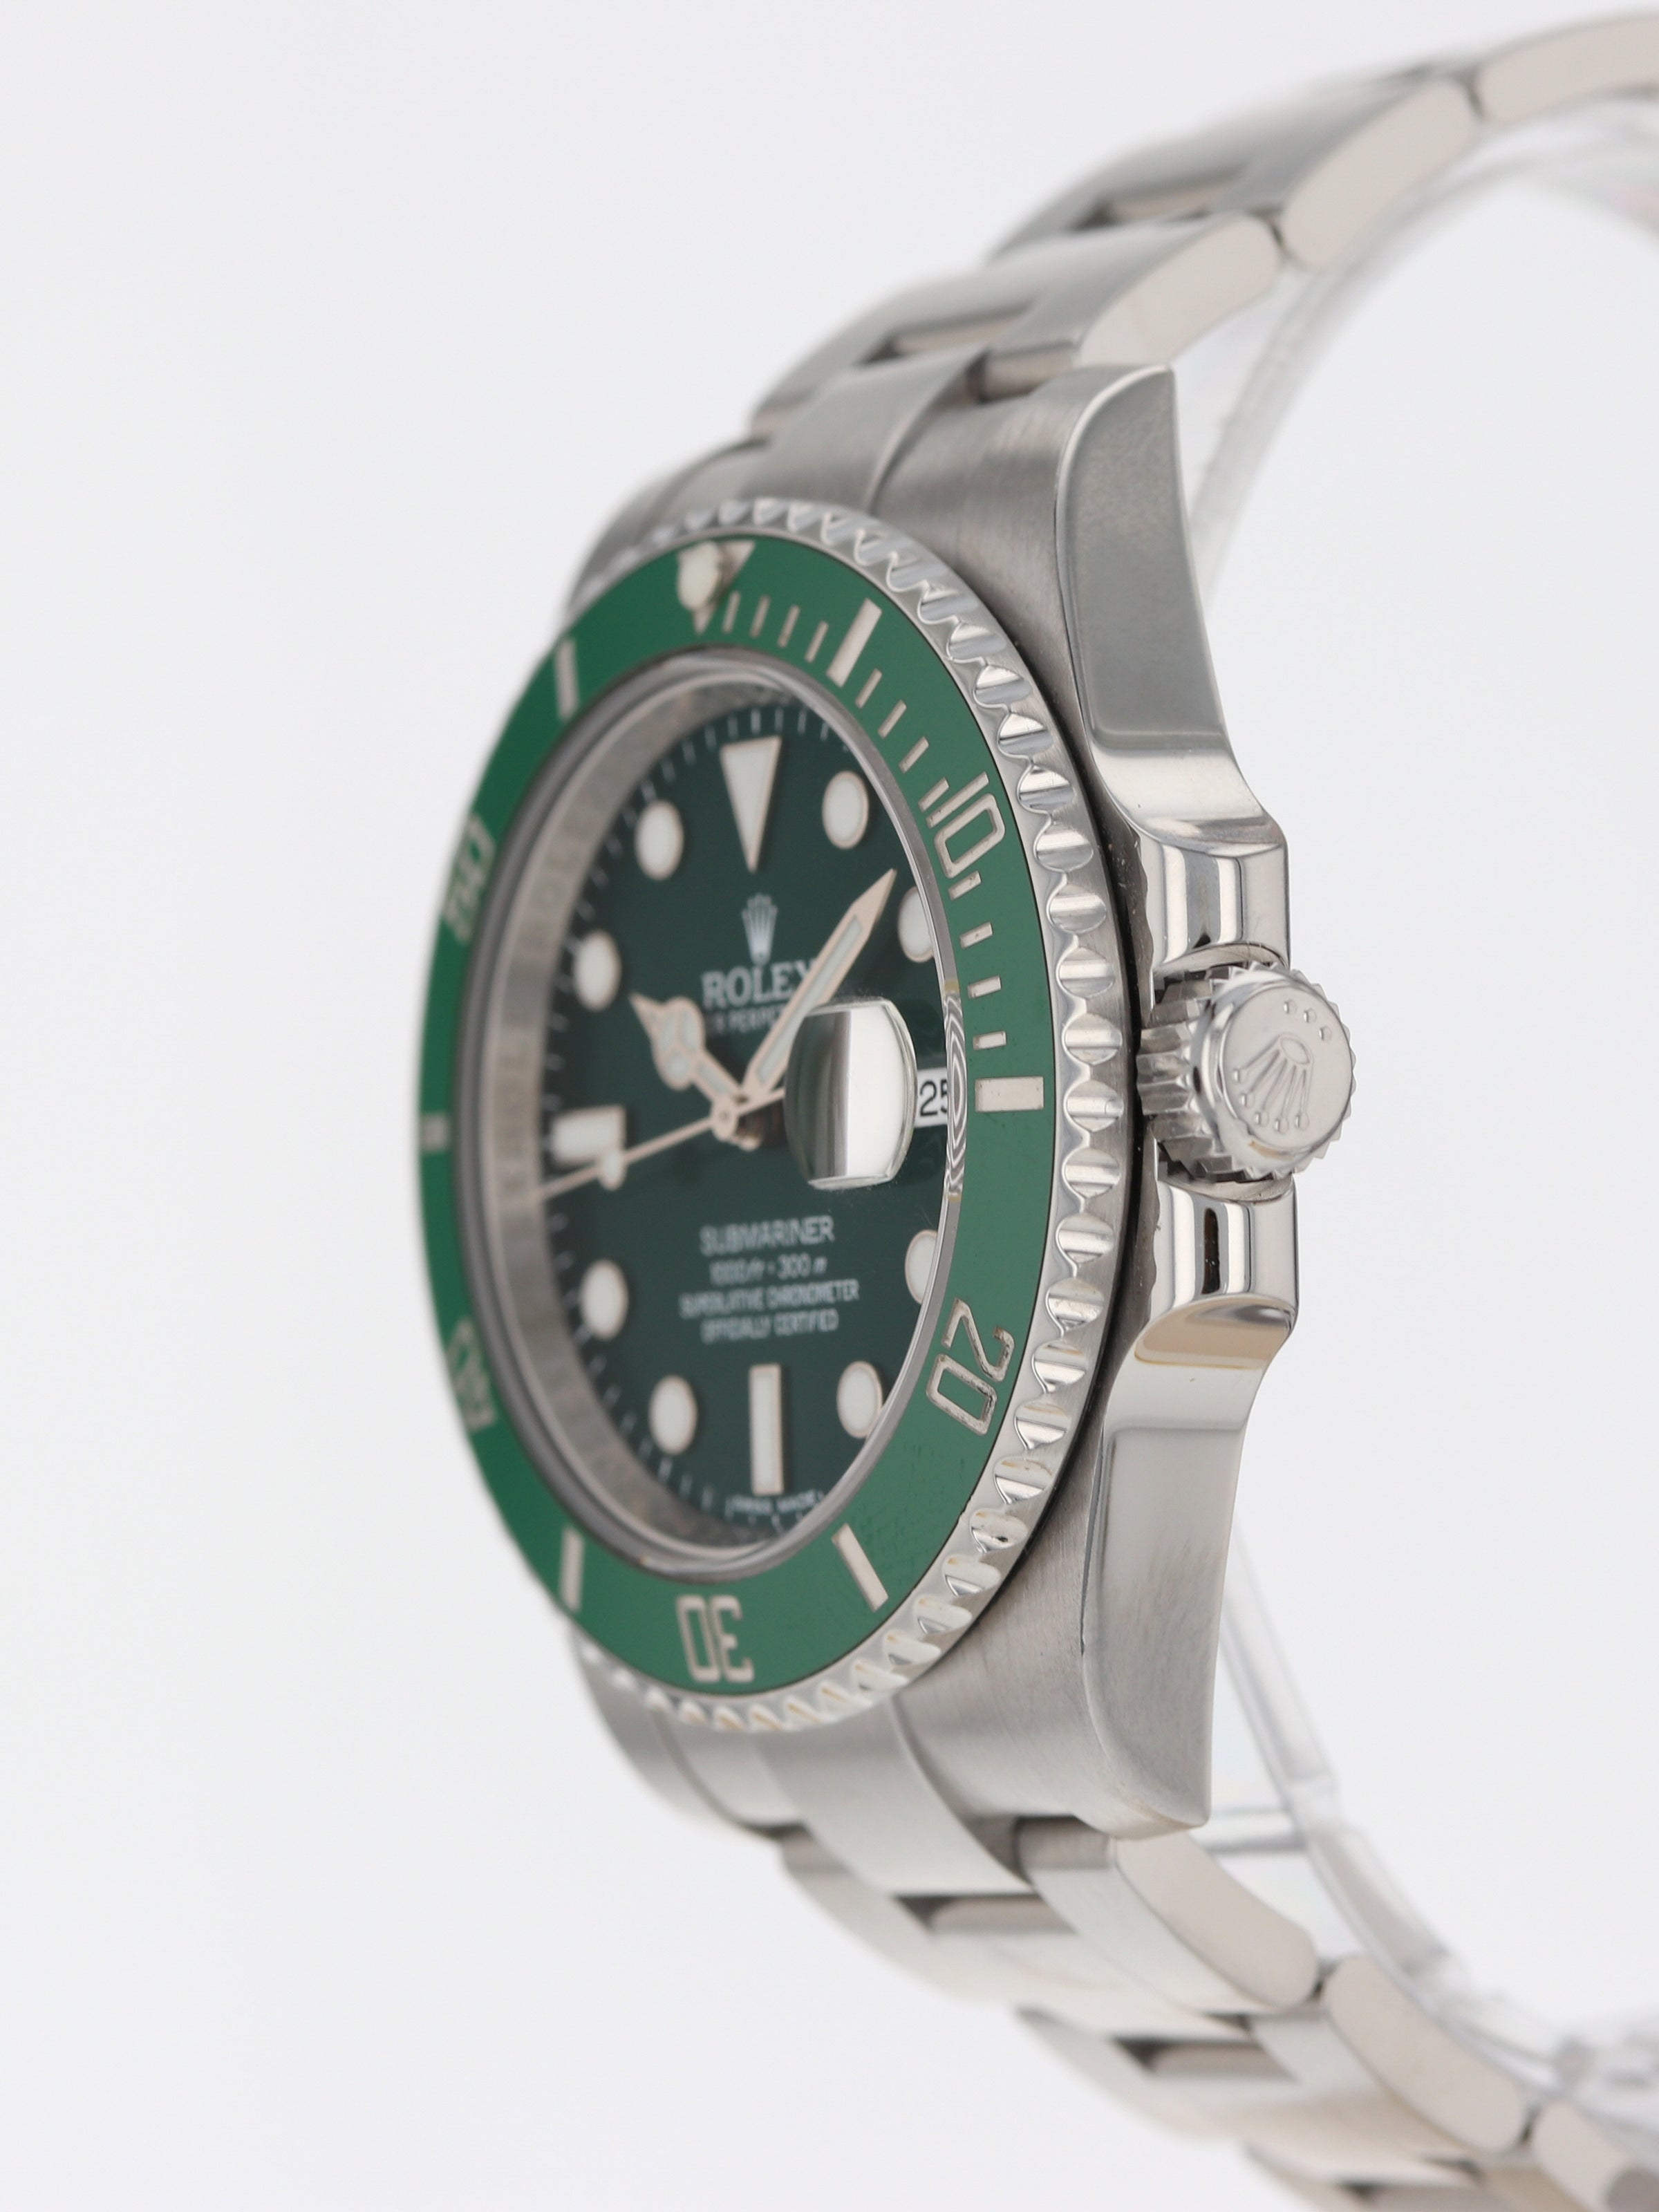 The Rolex Hulk Submariner 116610LV: Upclose and Personal